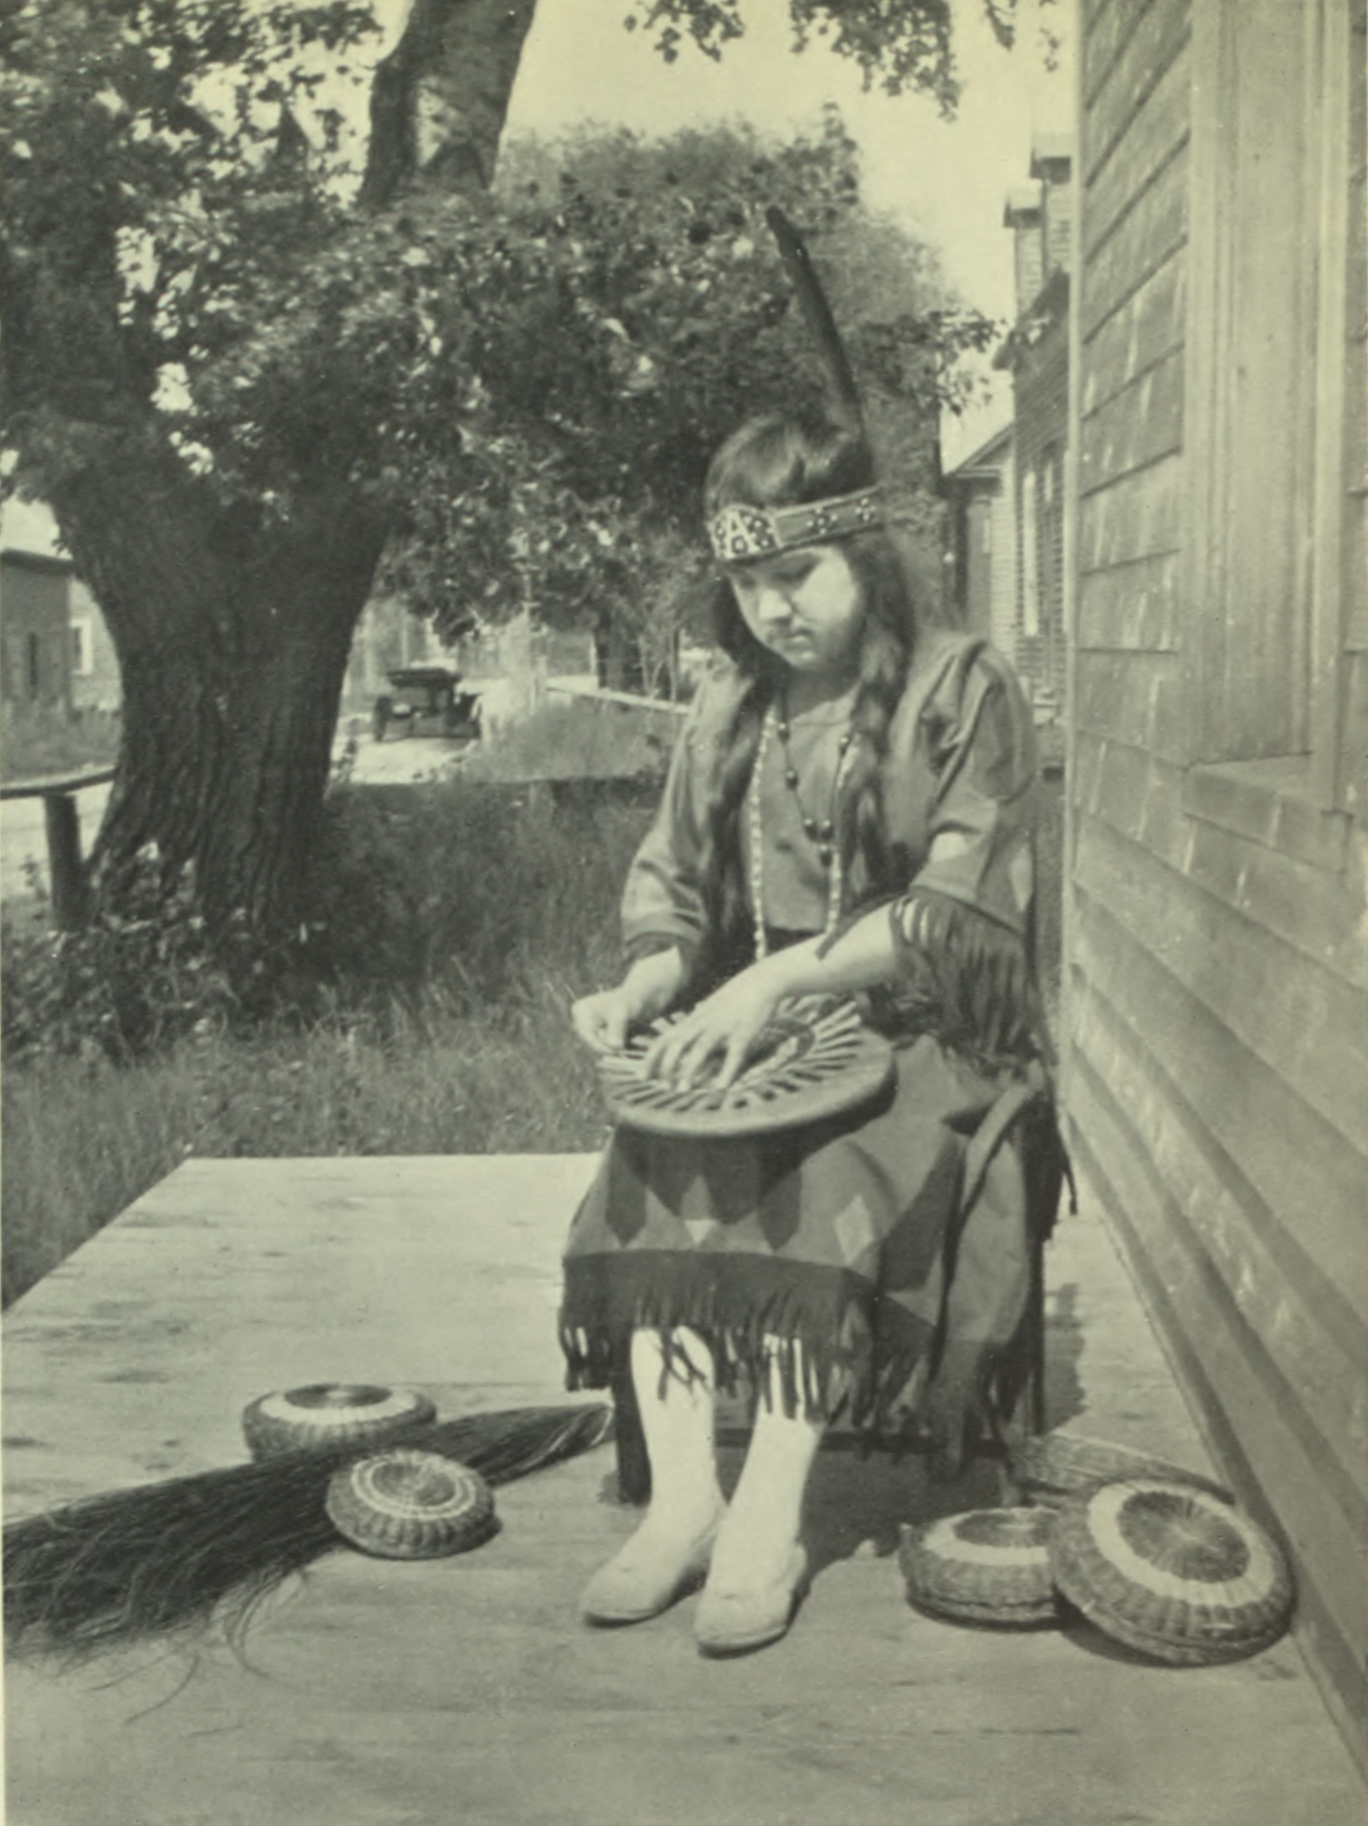 Child in Abenaki traditional clothing sitting outside with some baskets.